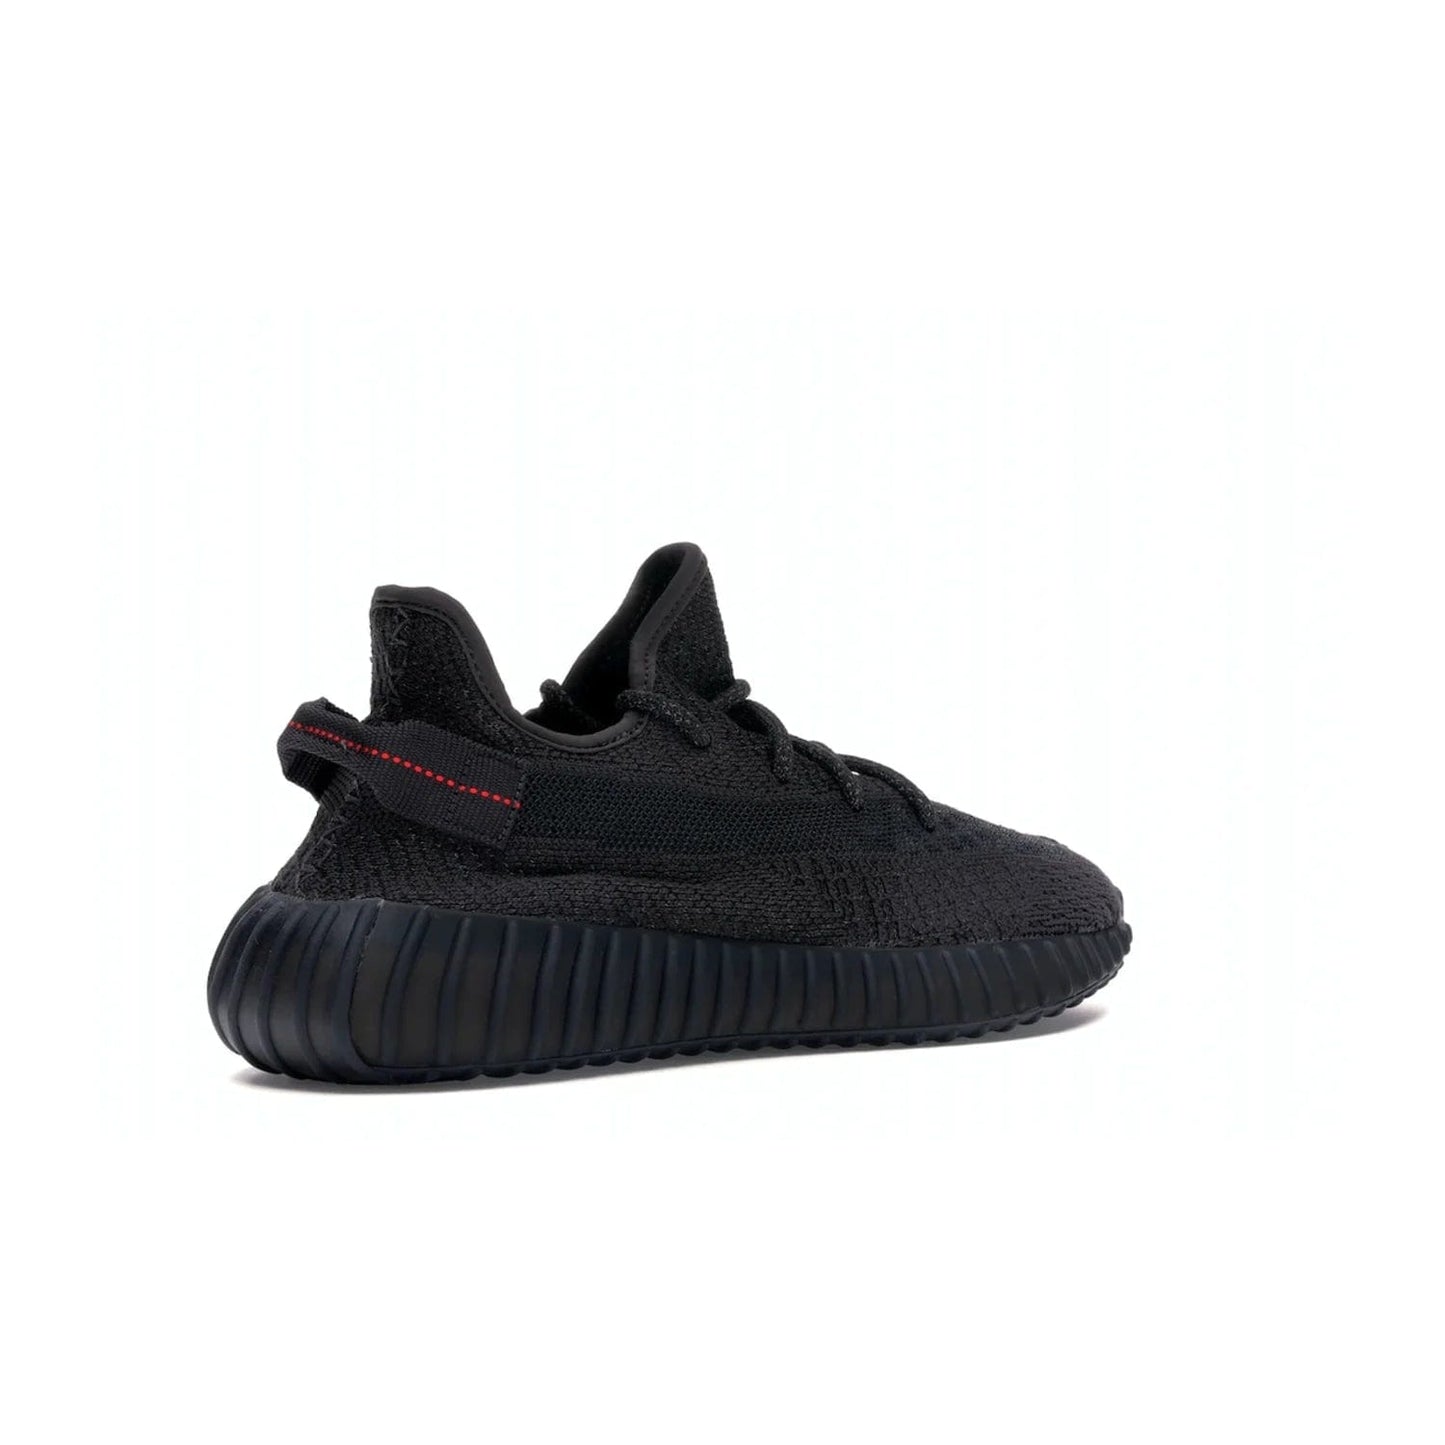 adidas Yeezy Boost 350 V2 Static Black (Reflective) - Image 33 - Only at www.BallersClubKickz.com - Make a statement with the adidas Yeezy Boost 350 V2 Static Black Reflective. All-black upper, reflective accents, midsole, and sole combine for a stylish look. High quality materials. June 2019 release. Add to your collection today.